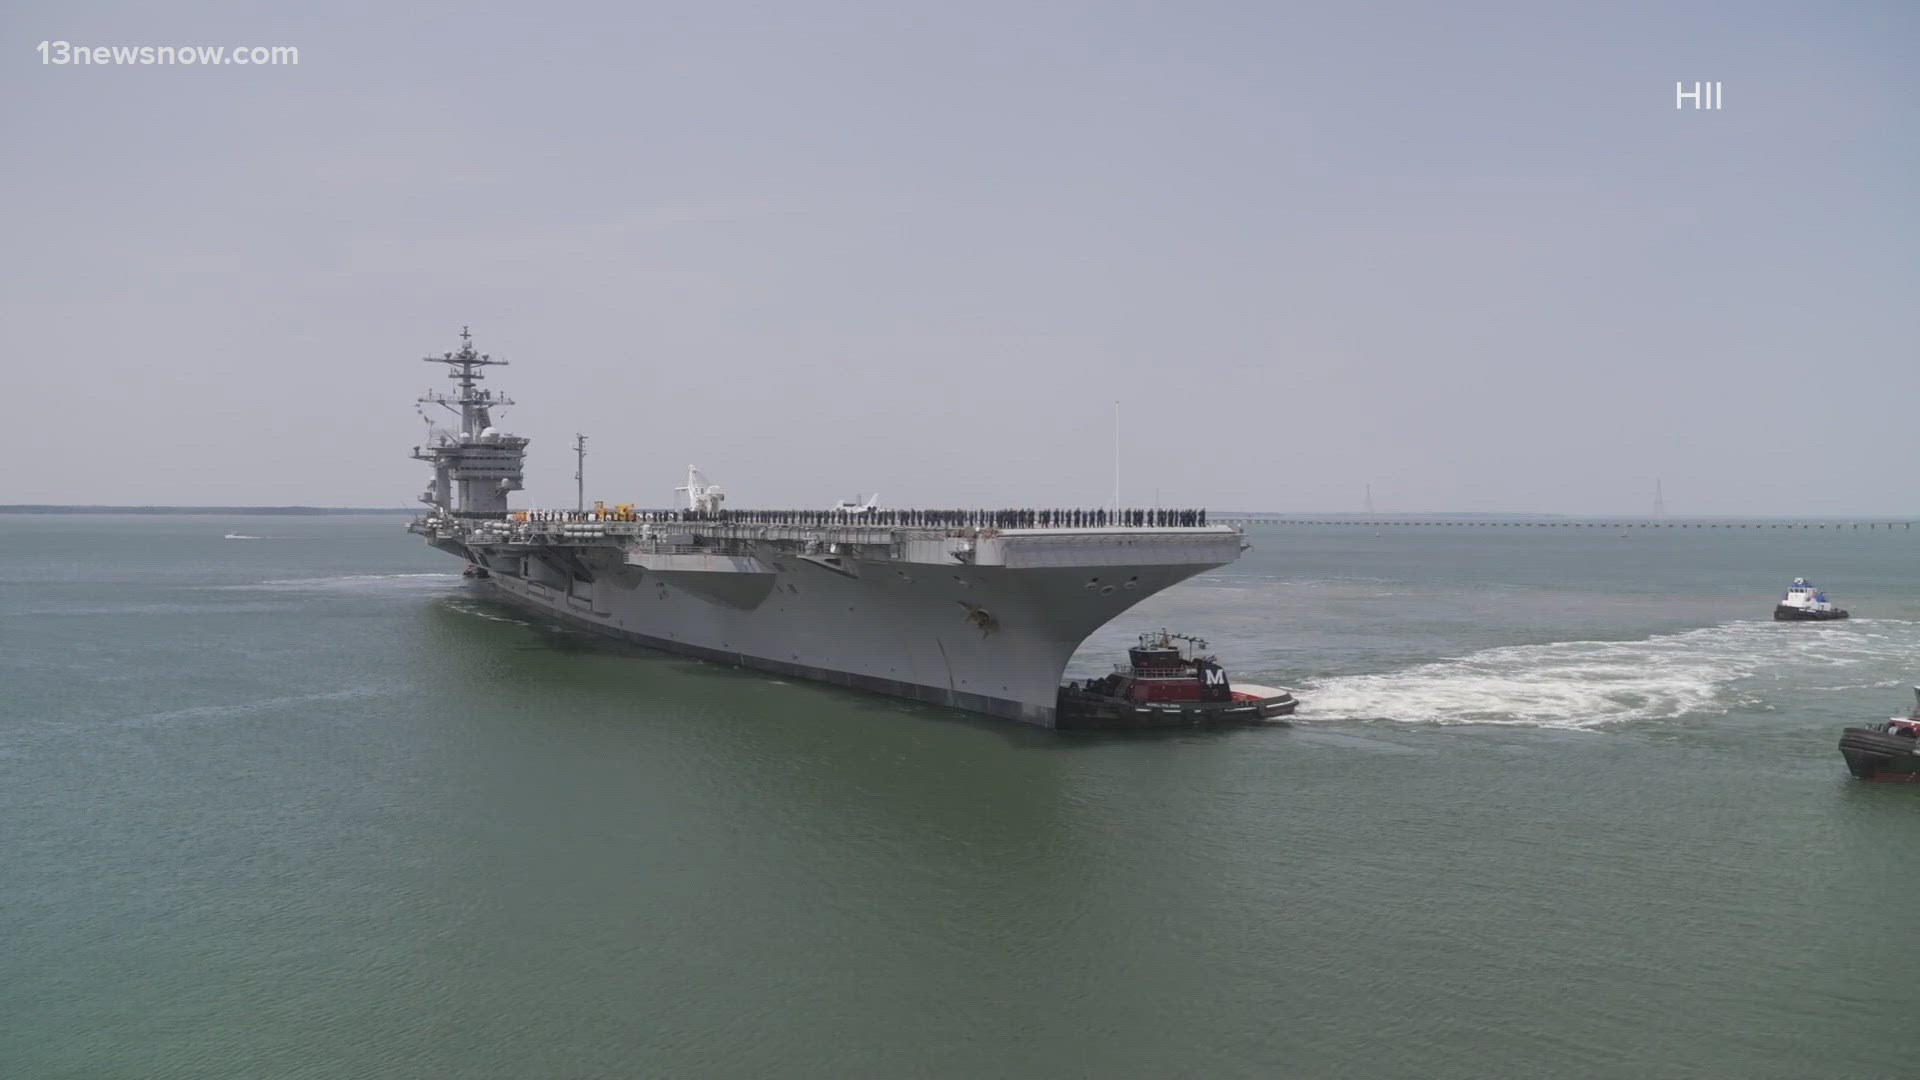 The aircraft carrier will not be returning to Naval Station Norfolk. Navy officials said it will instead transit South America.